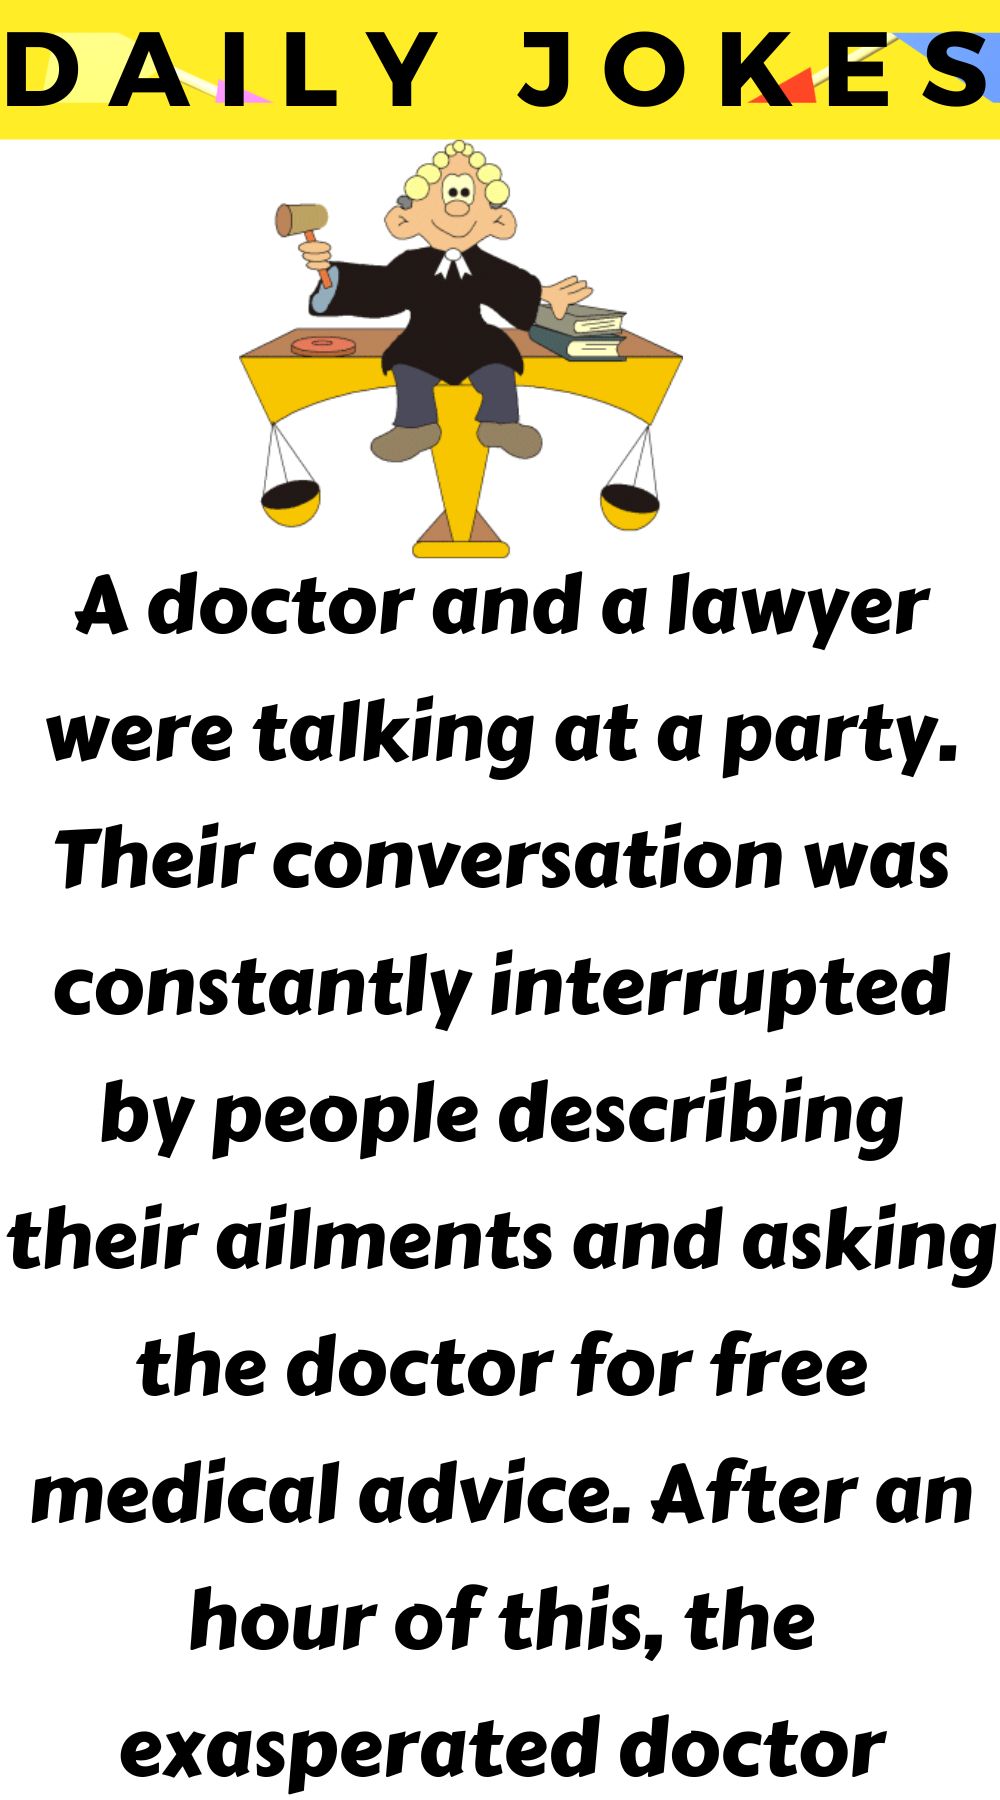 A doctor and a lawyer were talking at a party